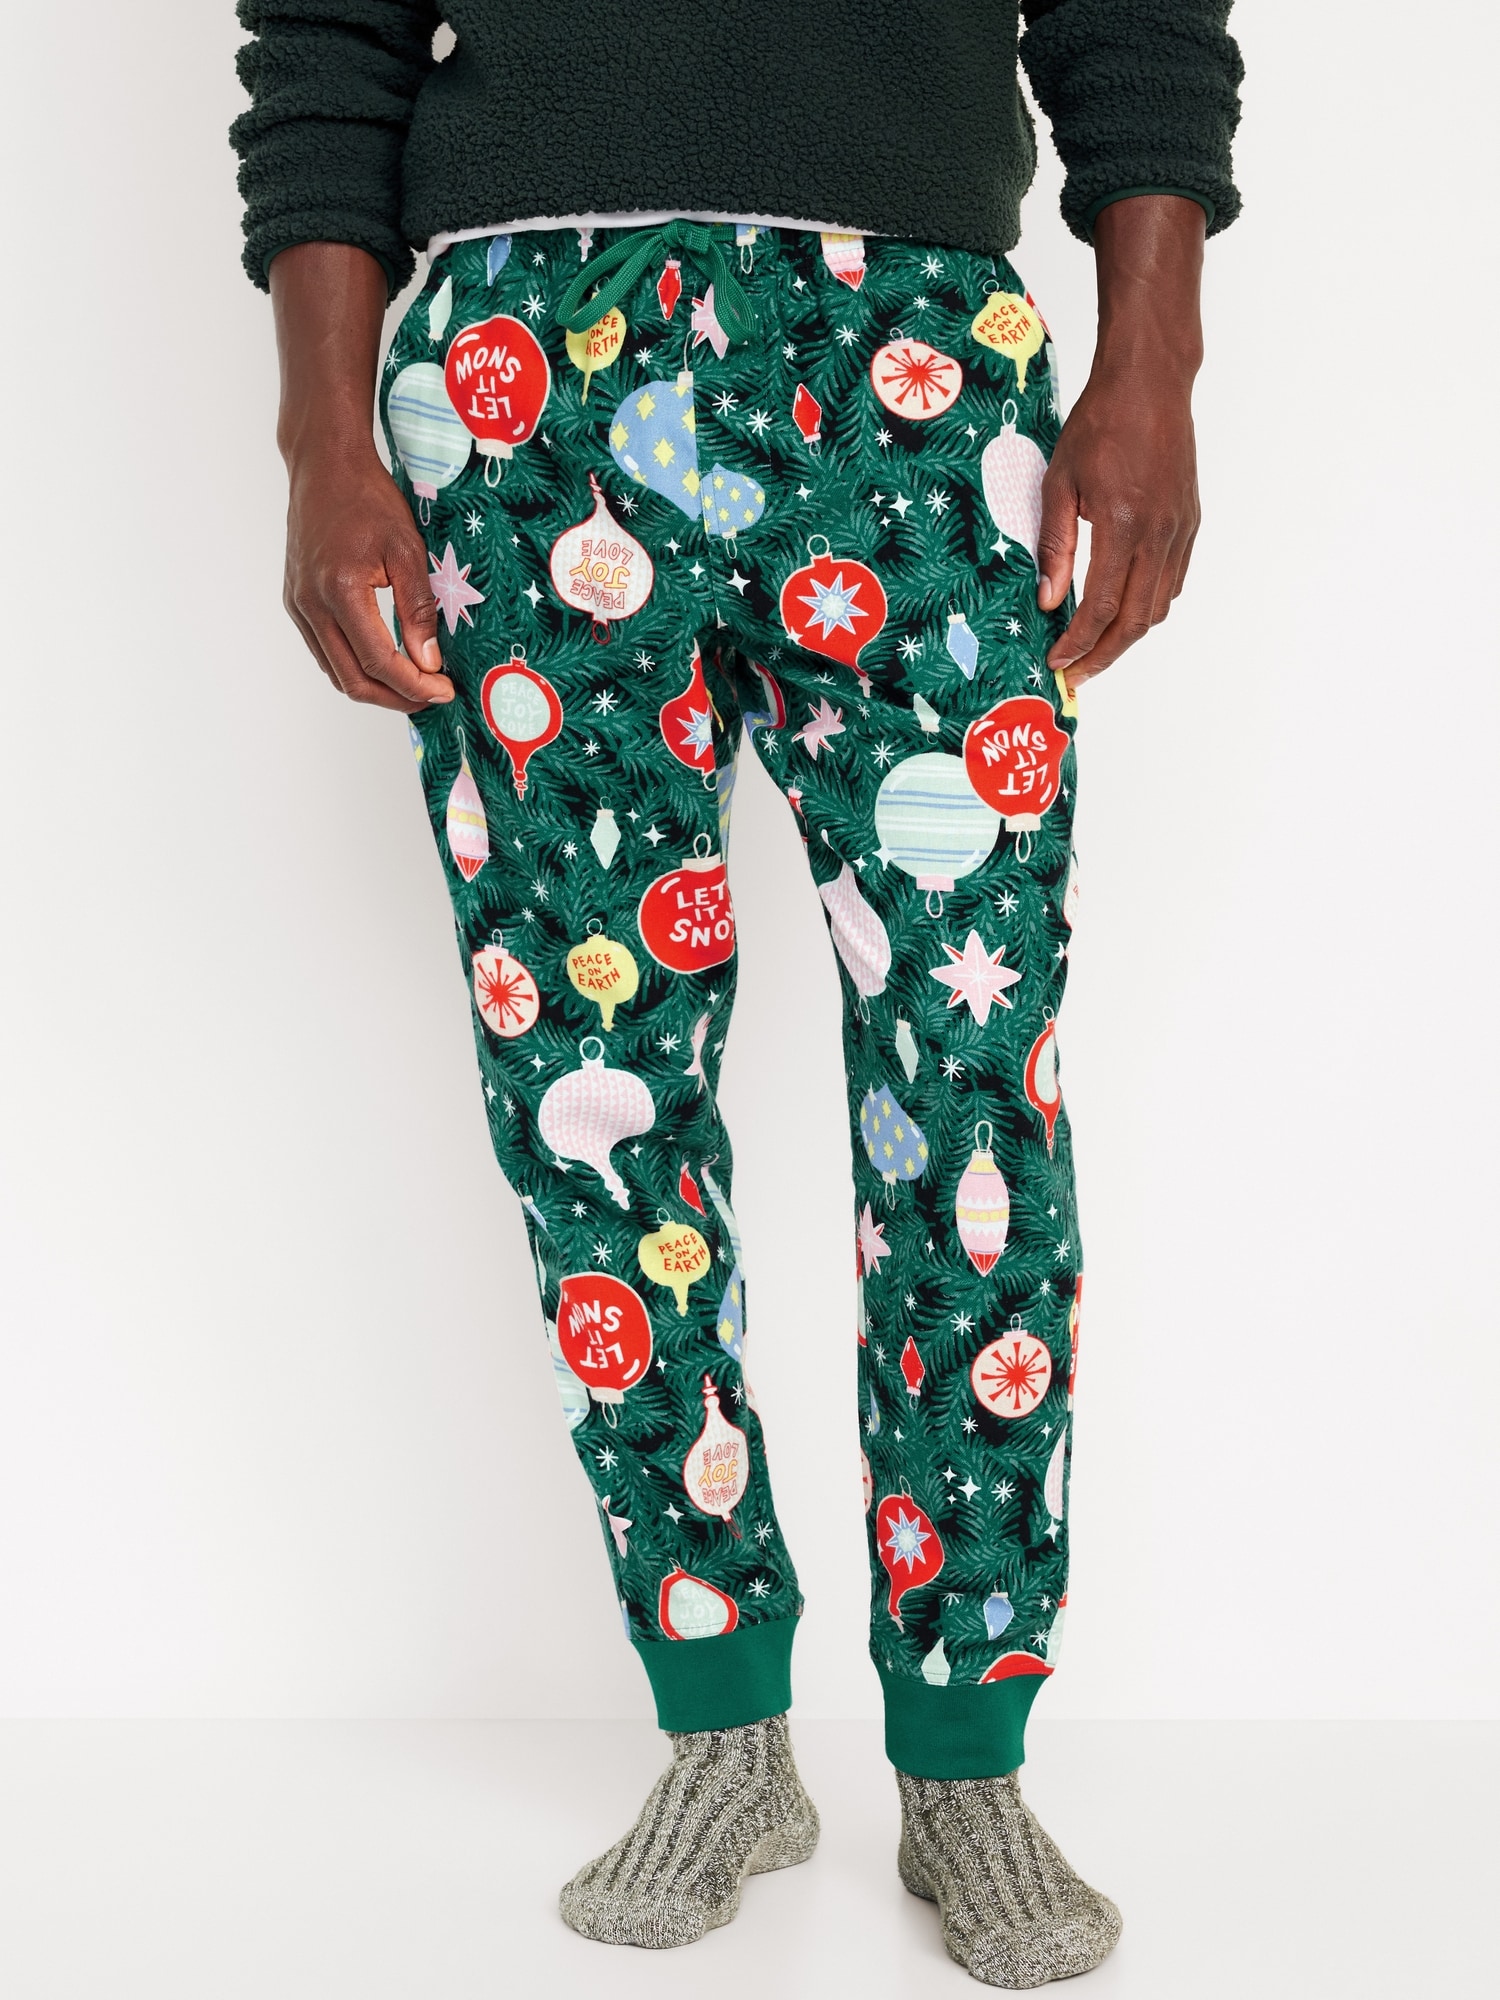 Matching Printed Flannel Jogger Pajama Pants for Men – Search By Inseam